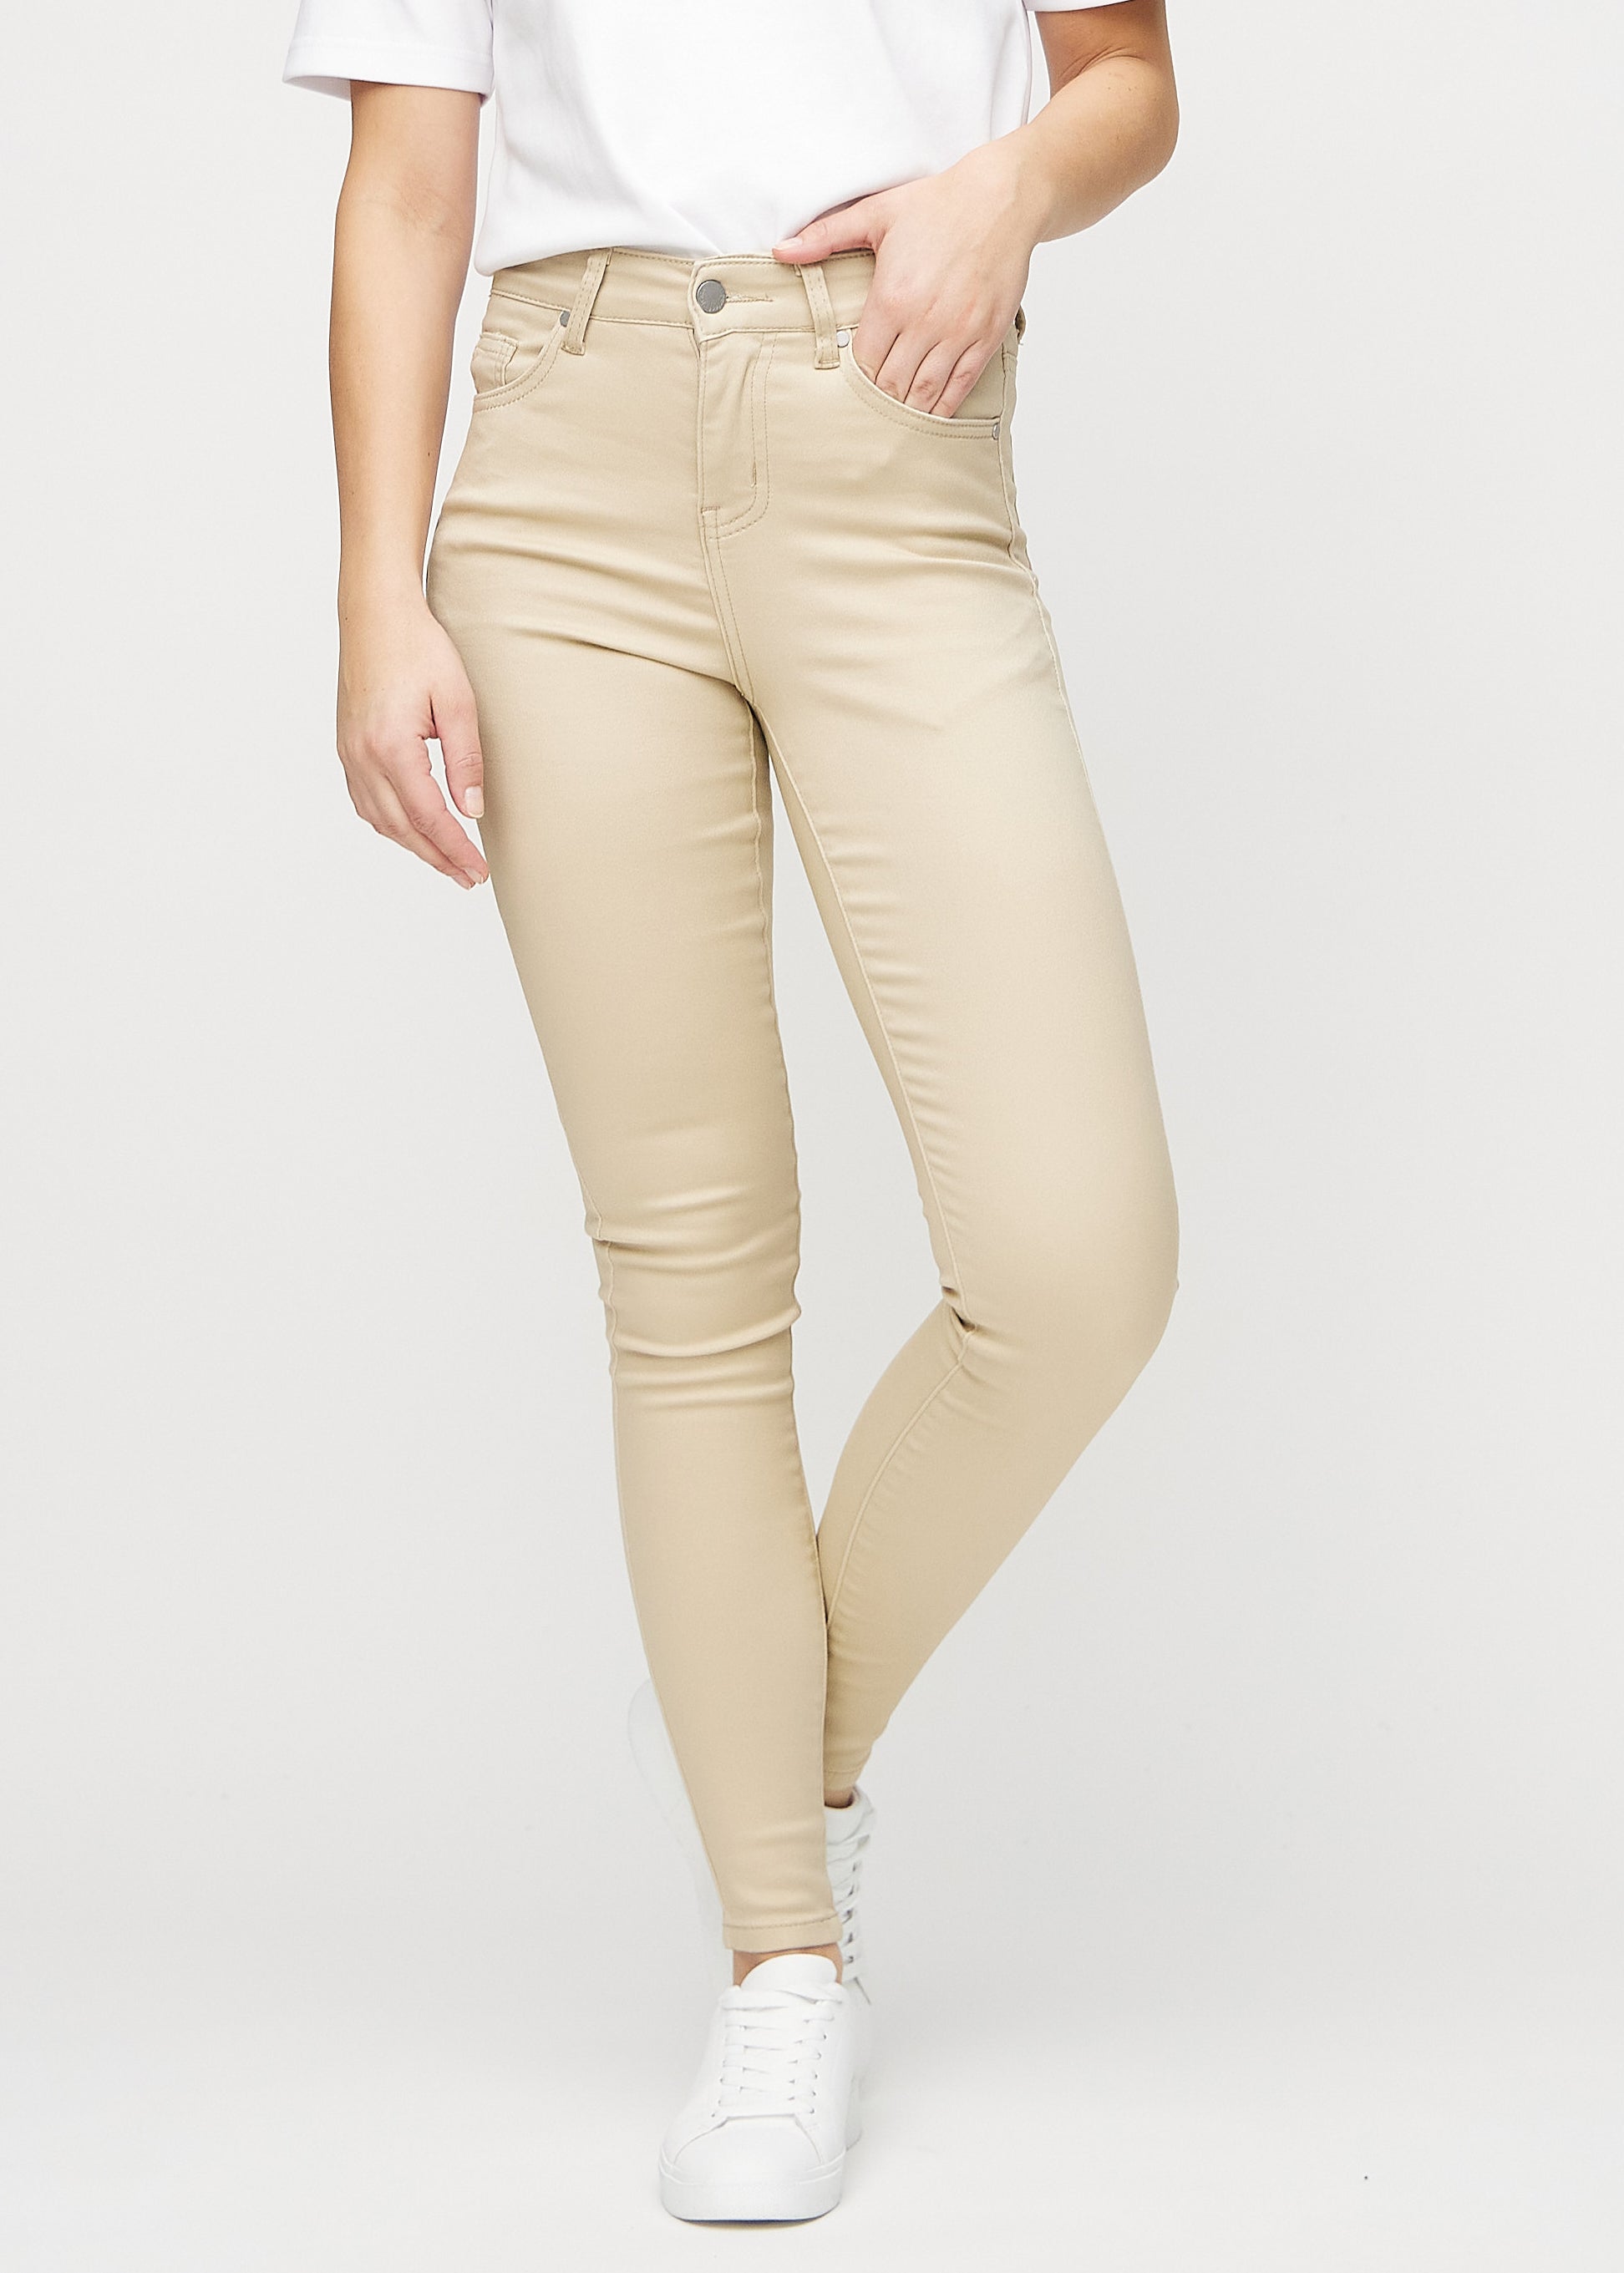 Perfect Jeans - Women